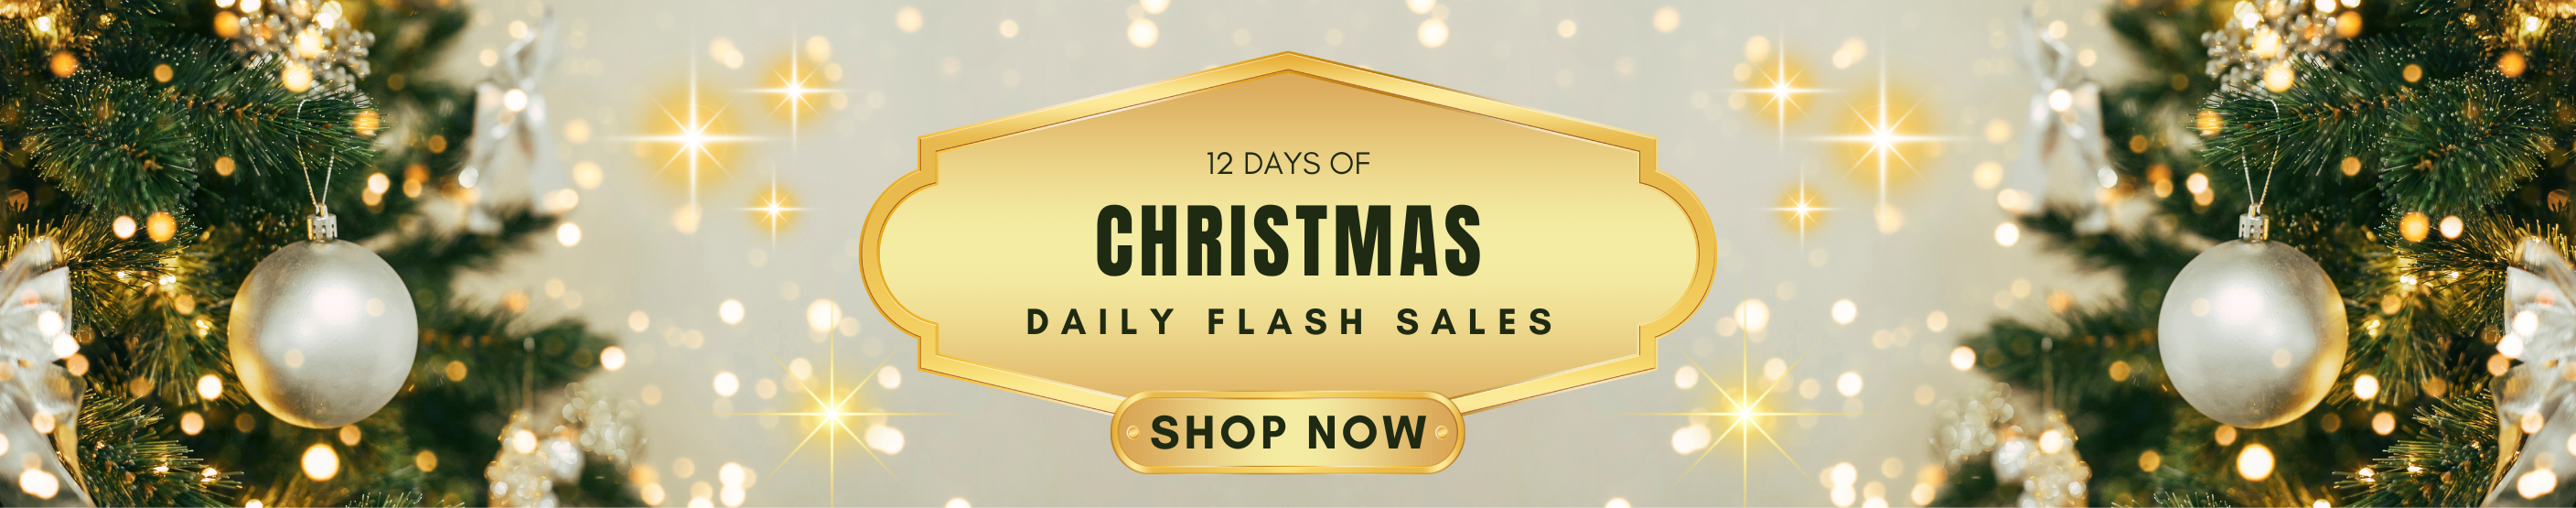 12 Days of Christmas Daily Flash Sale